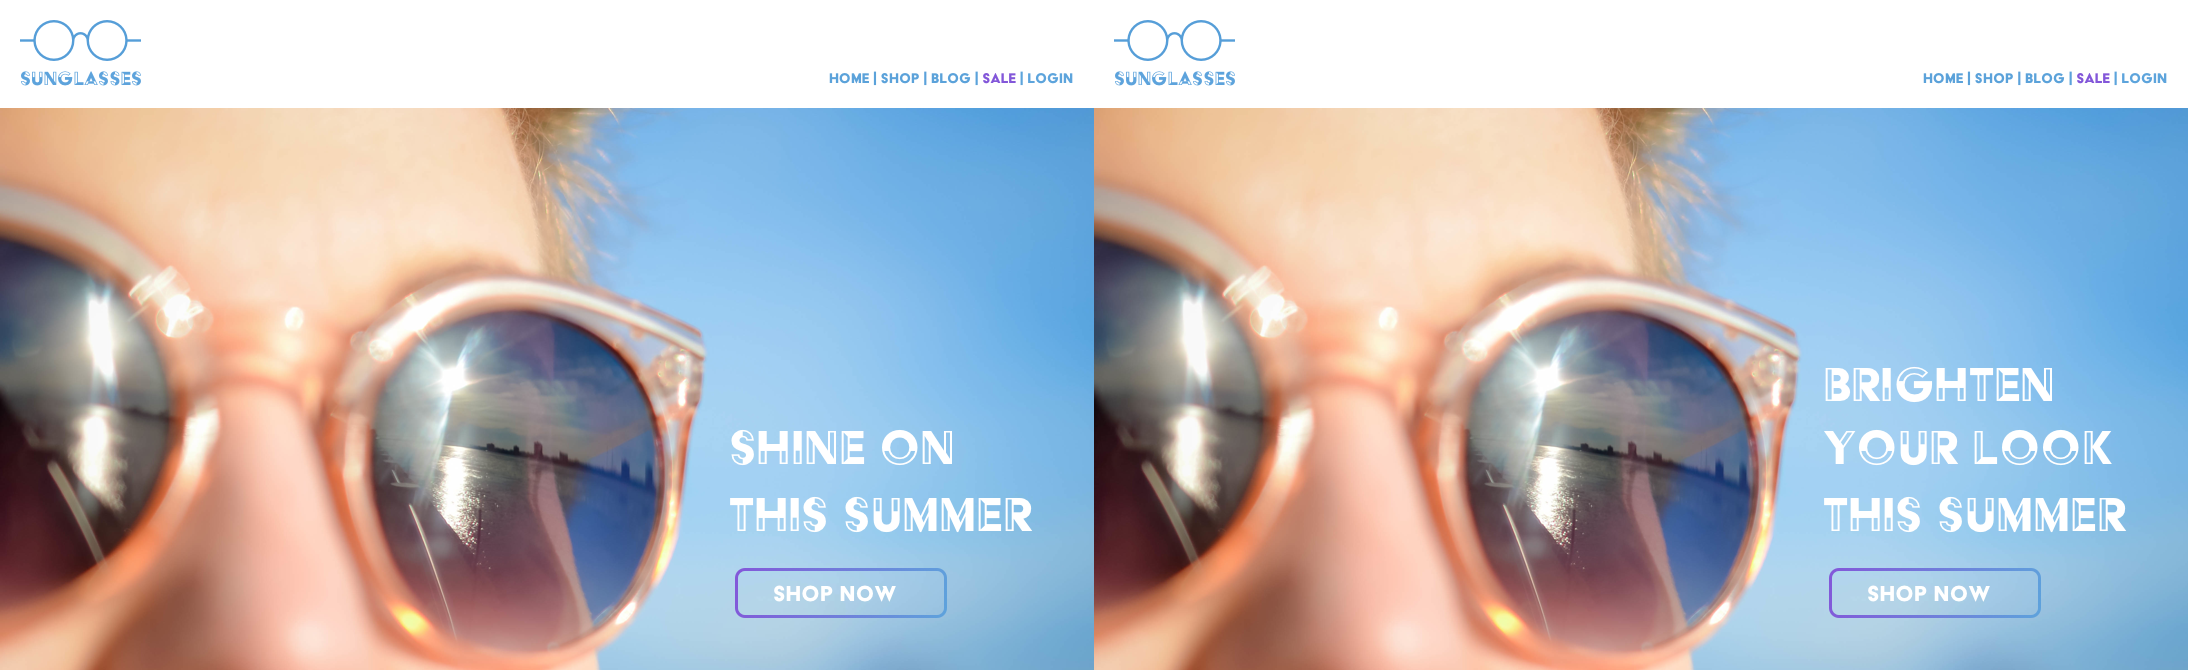 comparison of a sunglasses ad with two different slogans